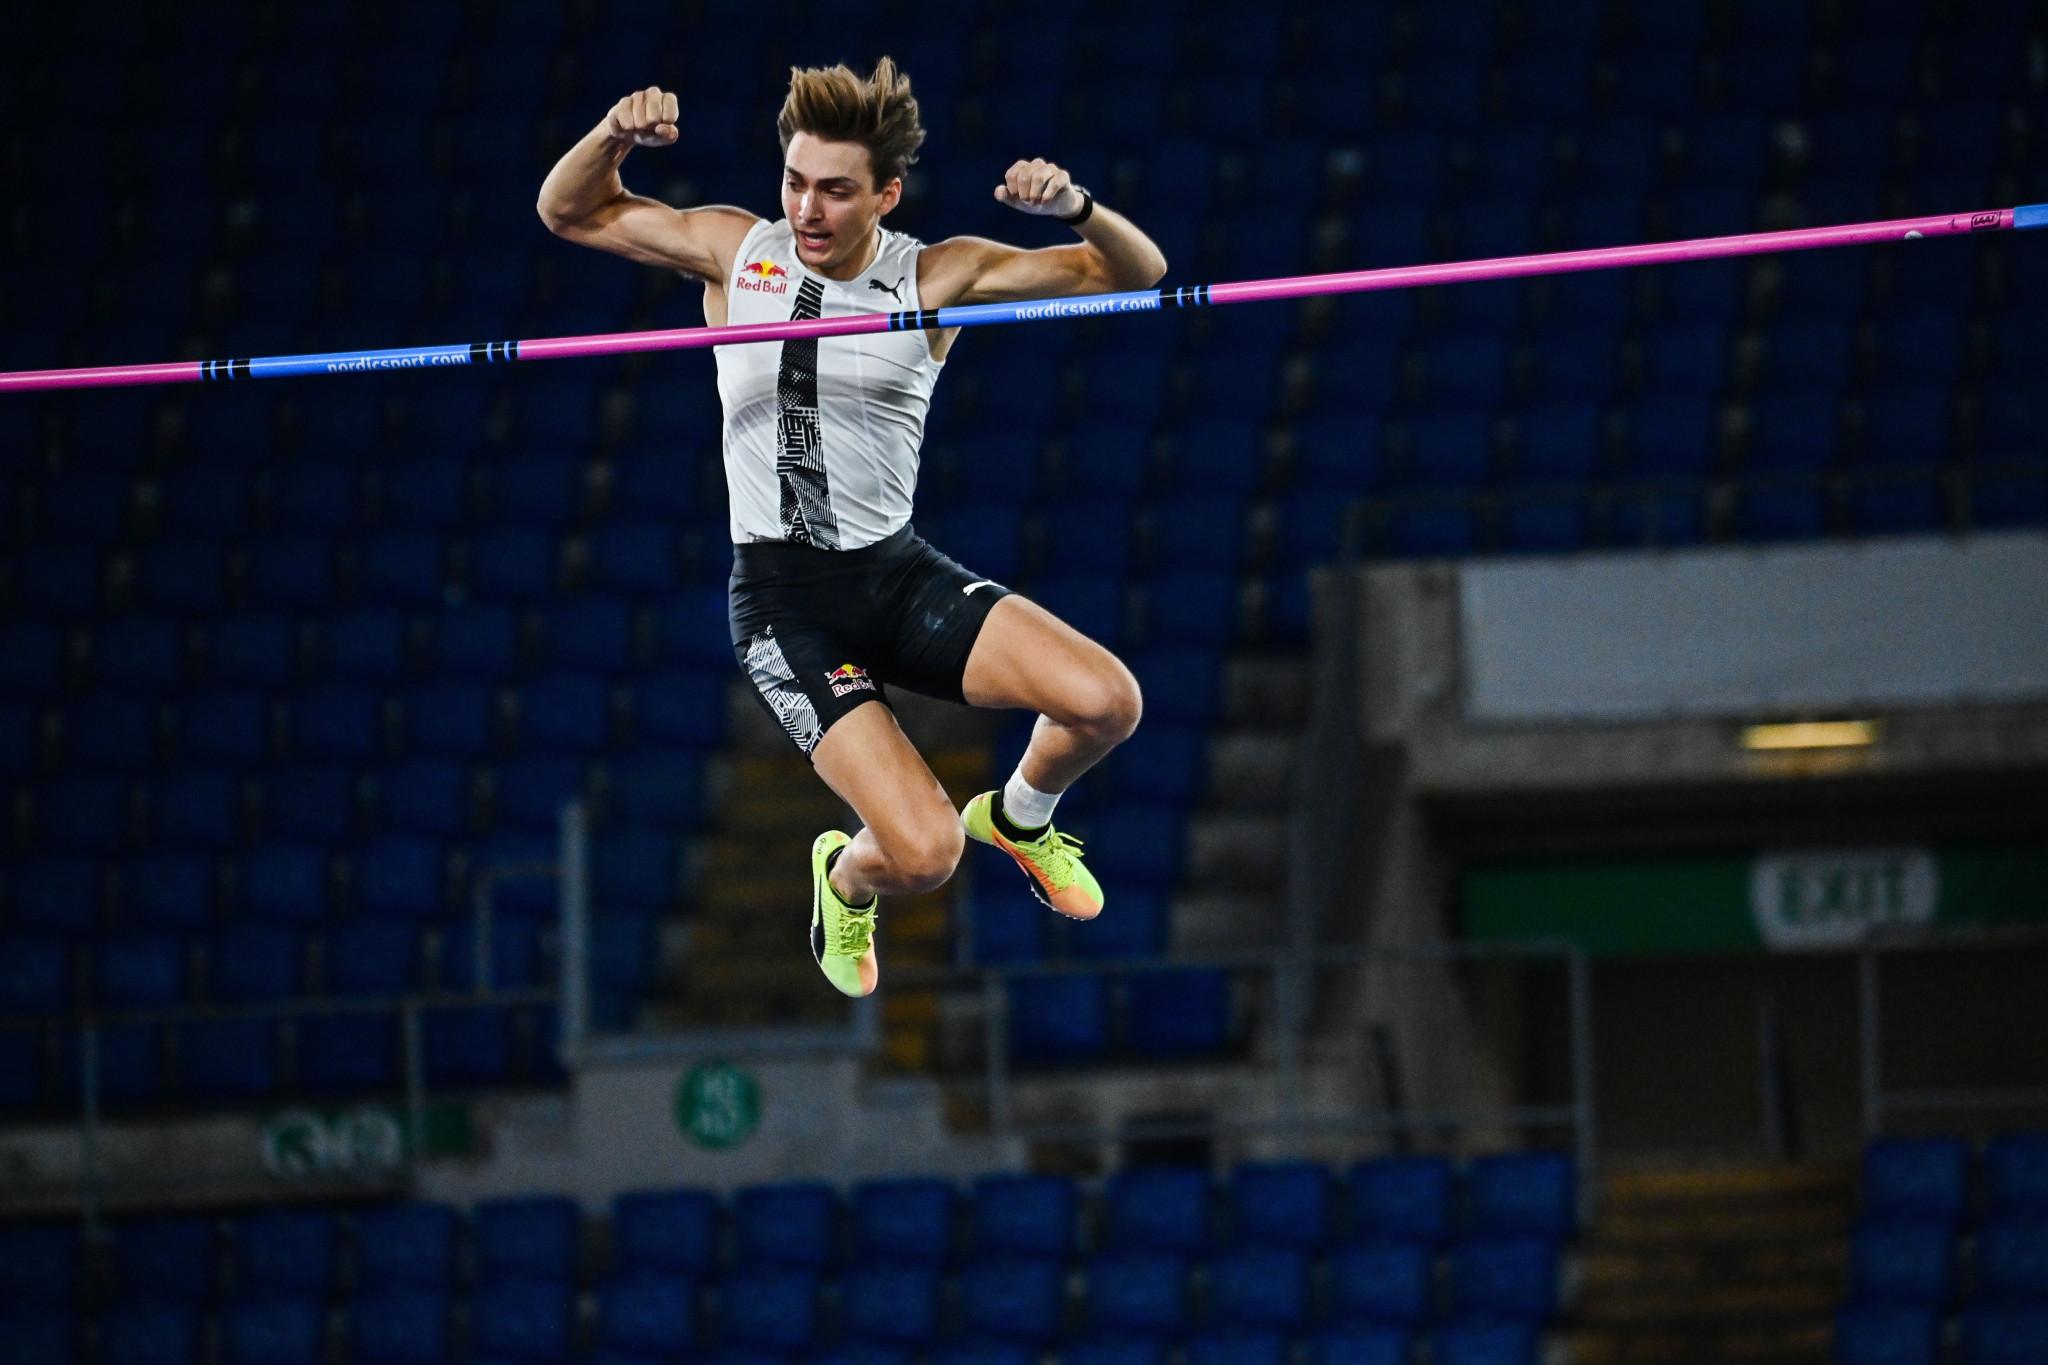 Pole vault star Duplantis among five finalists for Male World Athlete of the Year 2020 